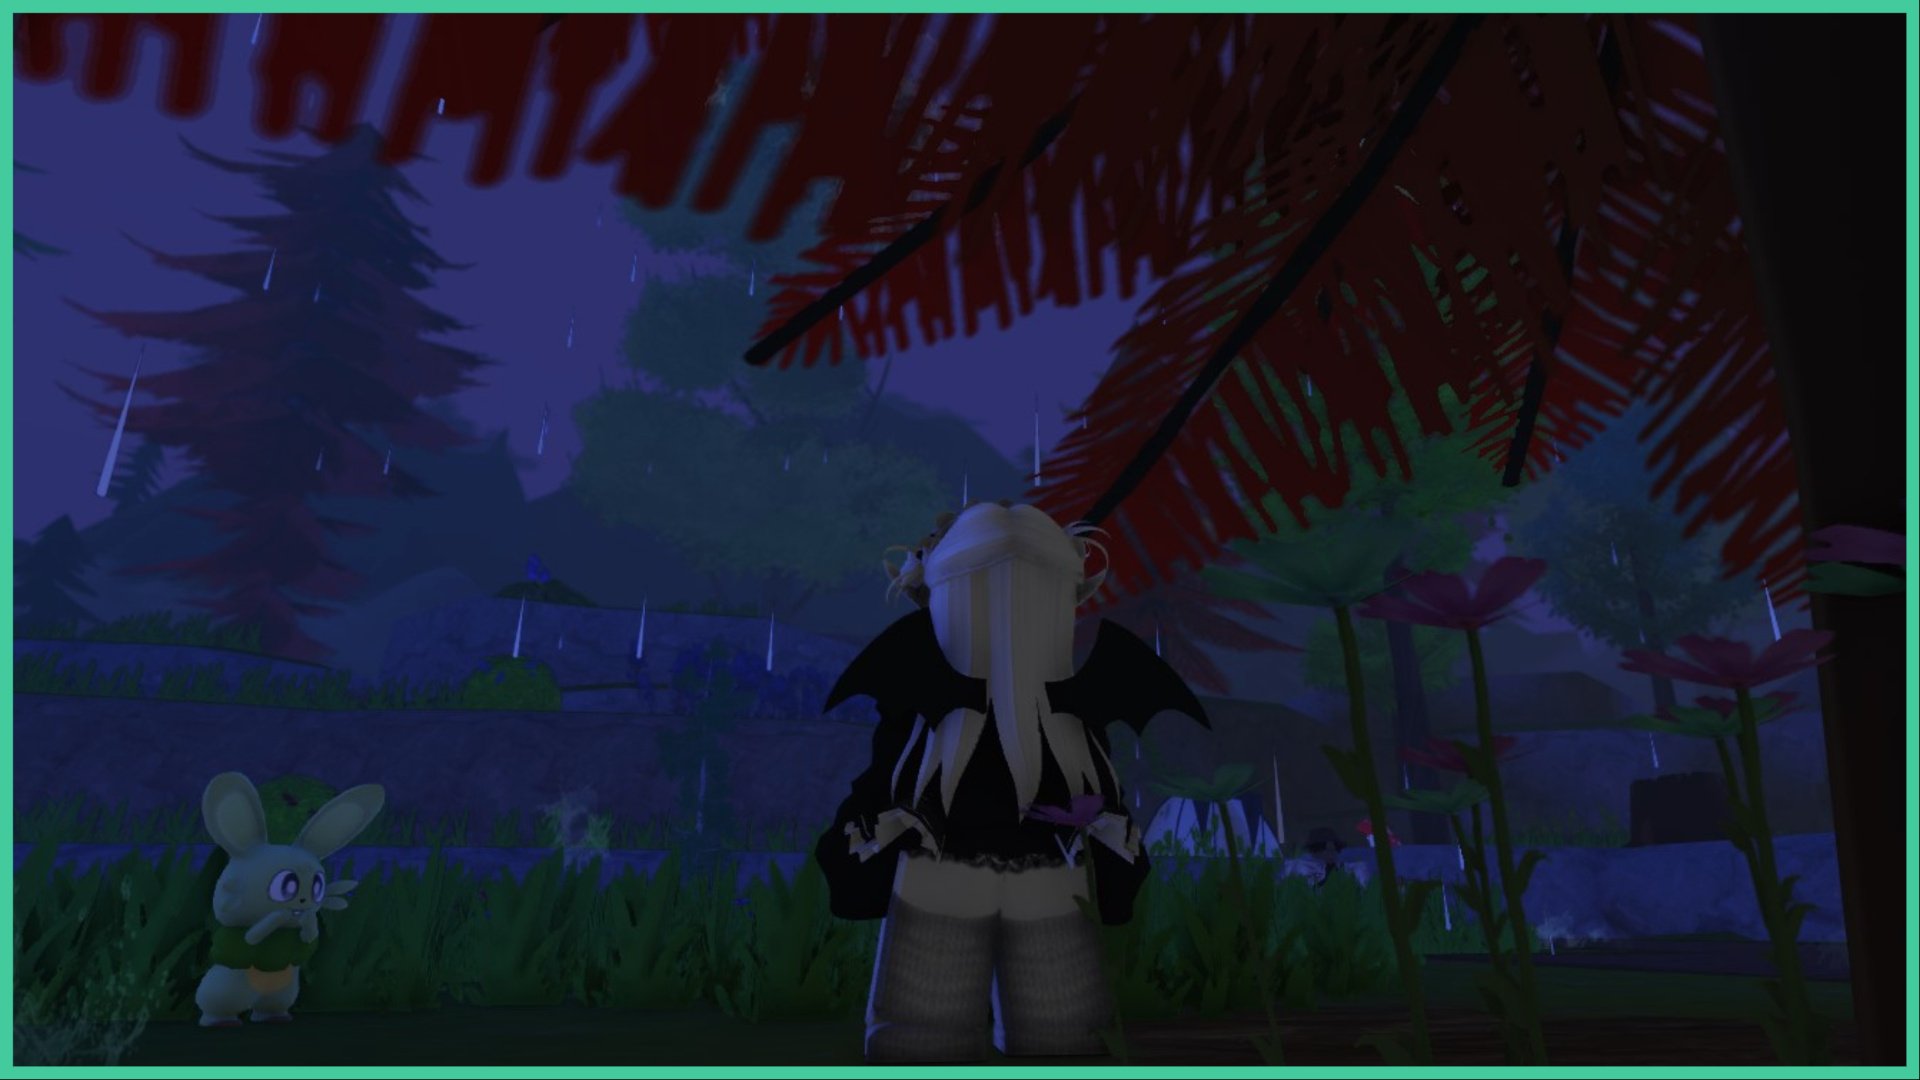 feature image for our tales of tanorio weather guide, the image features a screenshot of a roblox playe standing under a tall tree to shelter from the rain that is falling over the forest of route 2, the tanorian rabush is also standing by the tree, with some flowers to the right